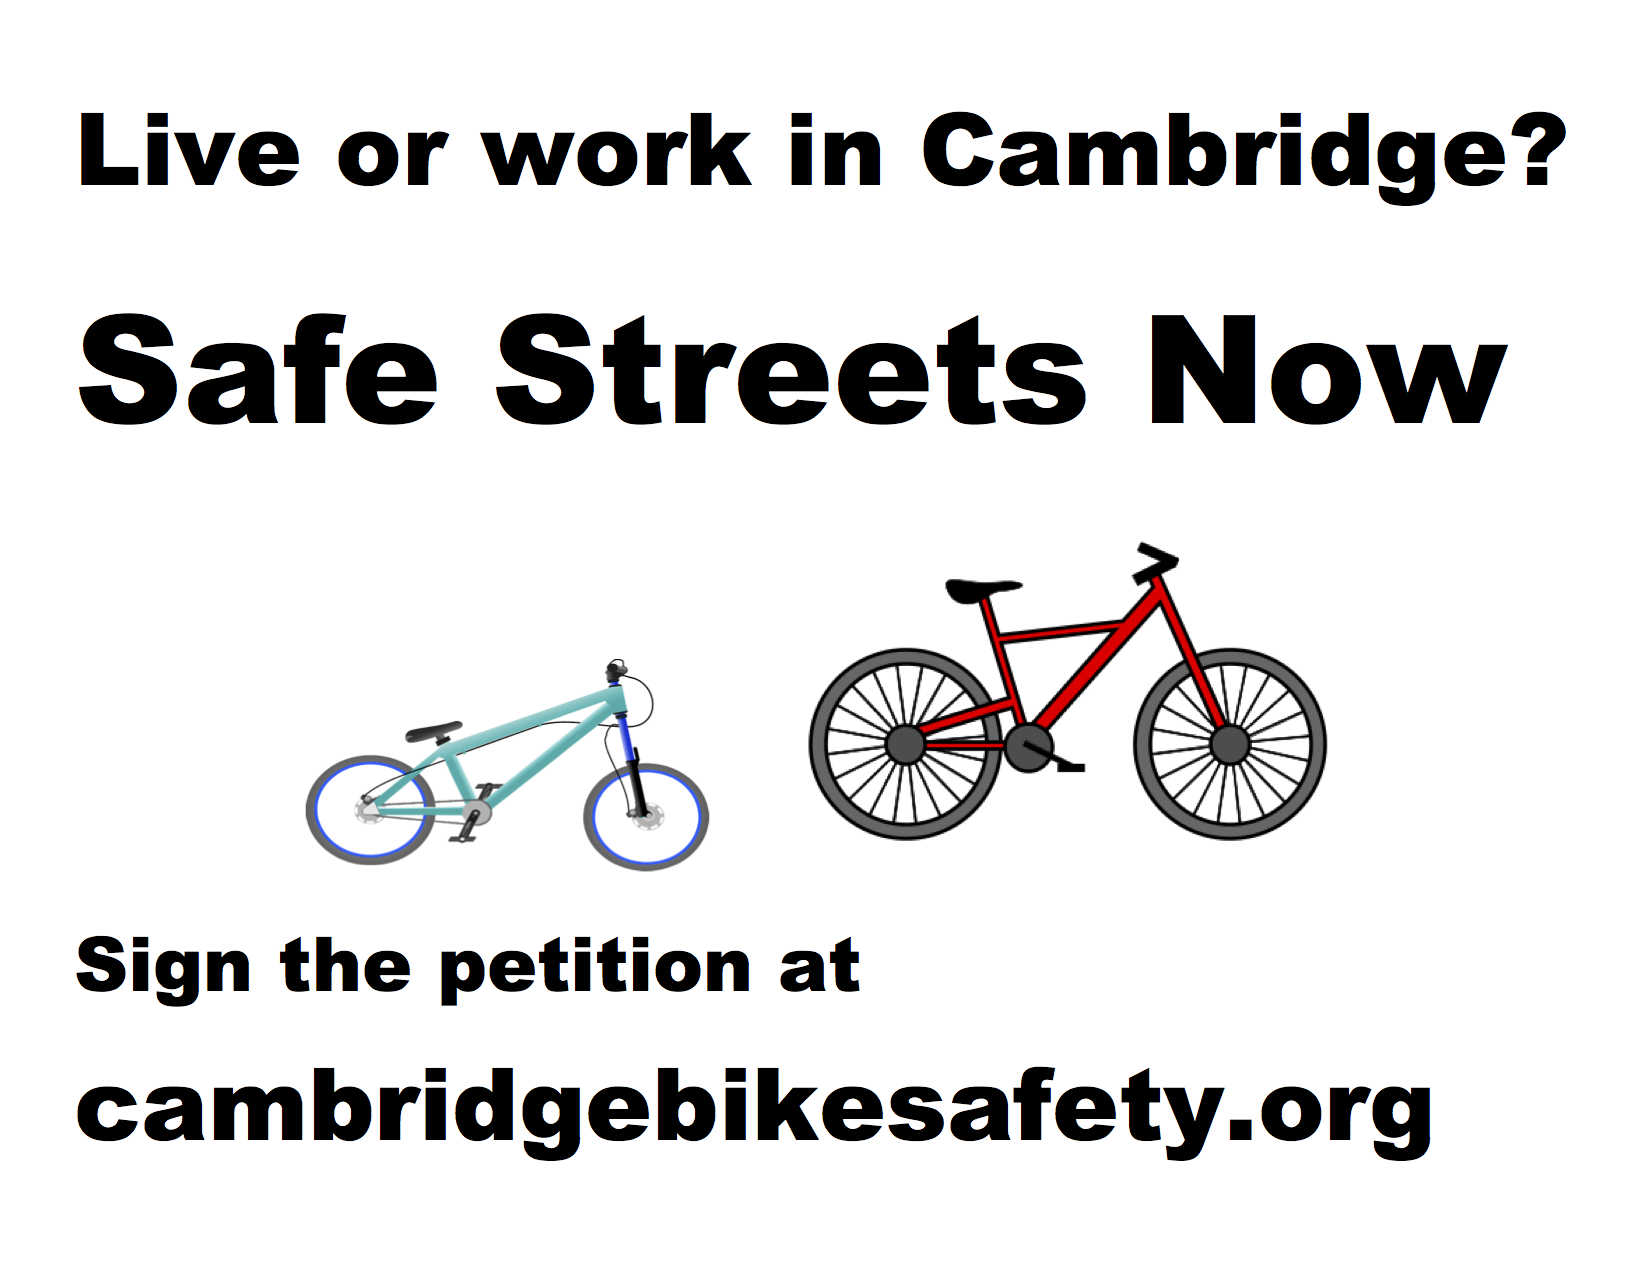 live-or-work-in-cambridge-petition-sign-two-sided-first-page